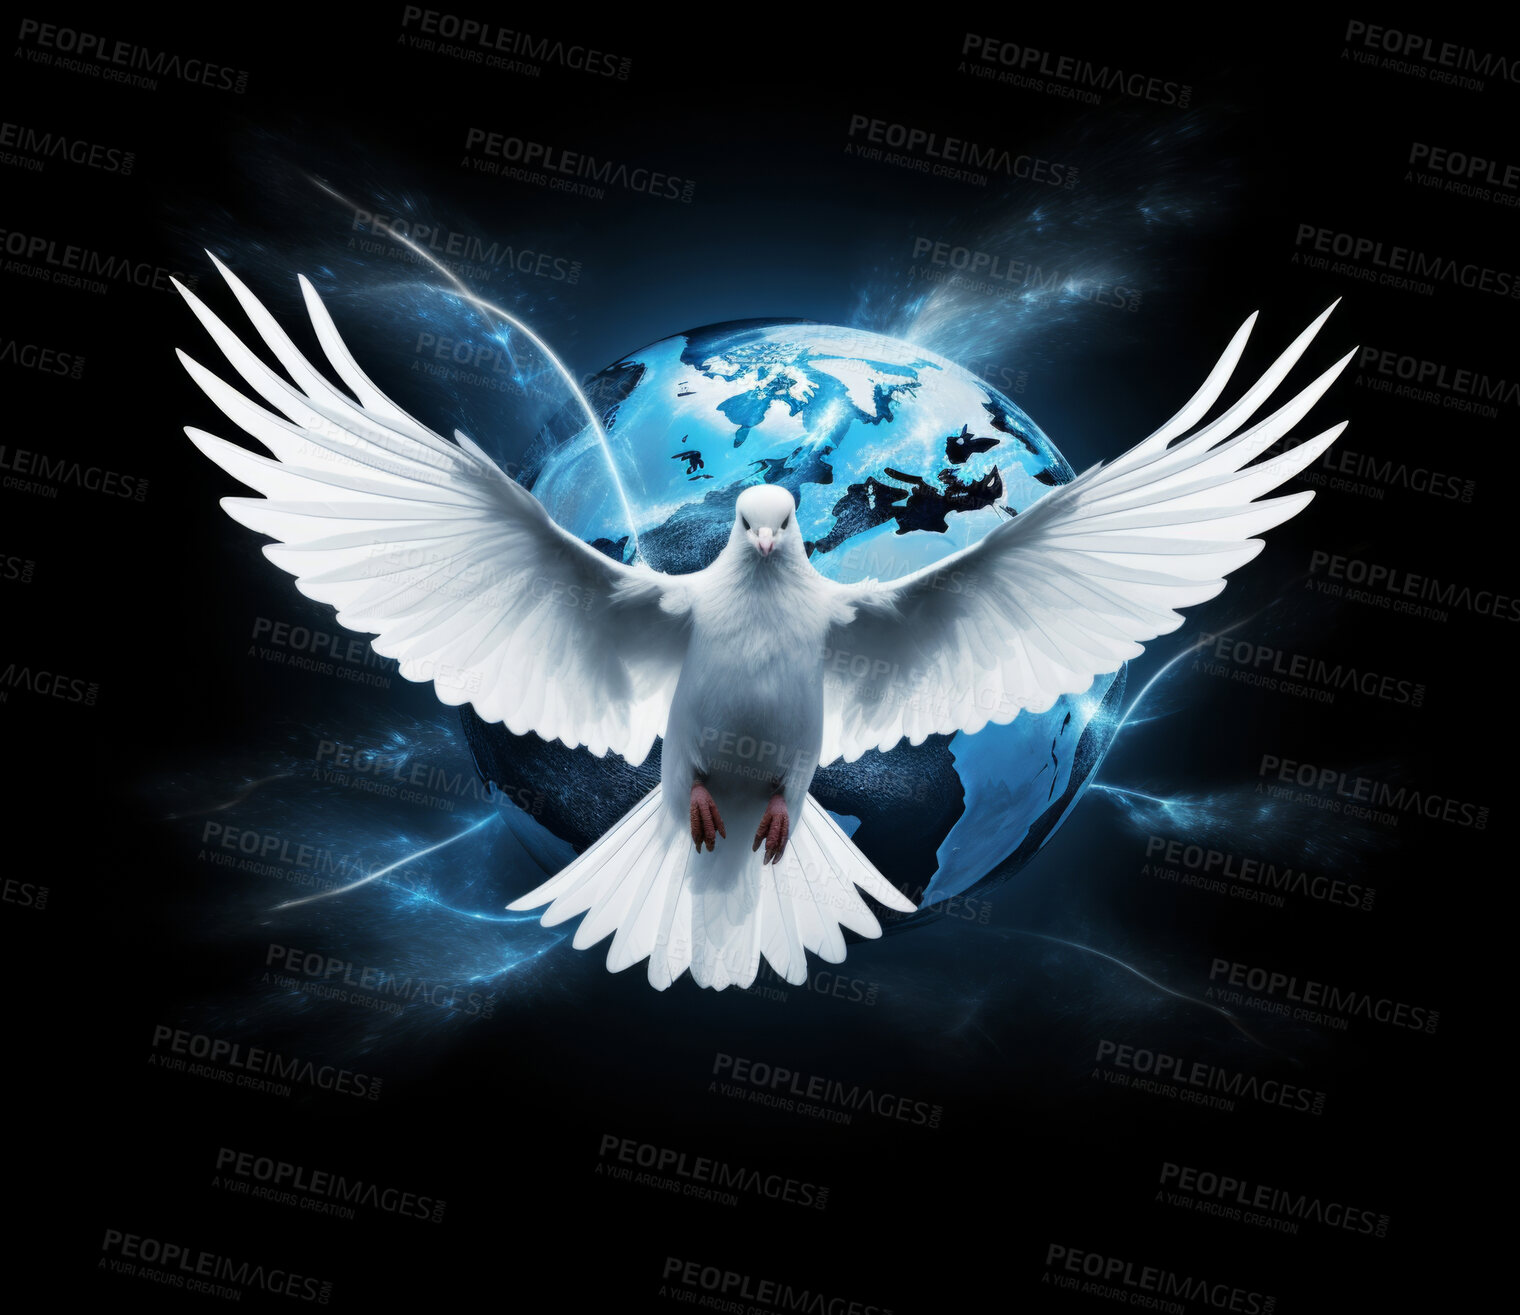 Buy stock photo Illustration of white dove soaring over earth. World peace concept.